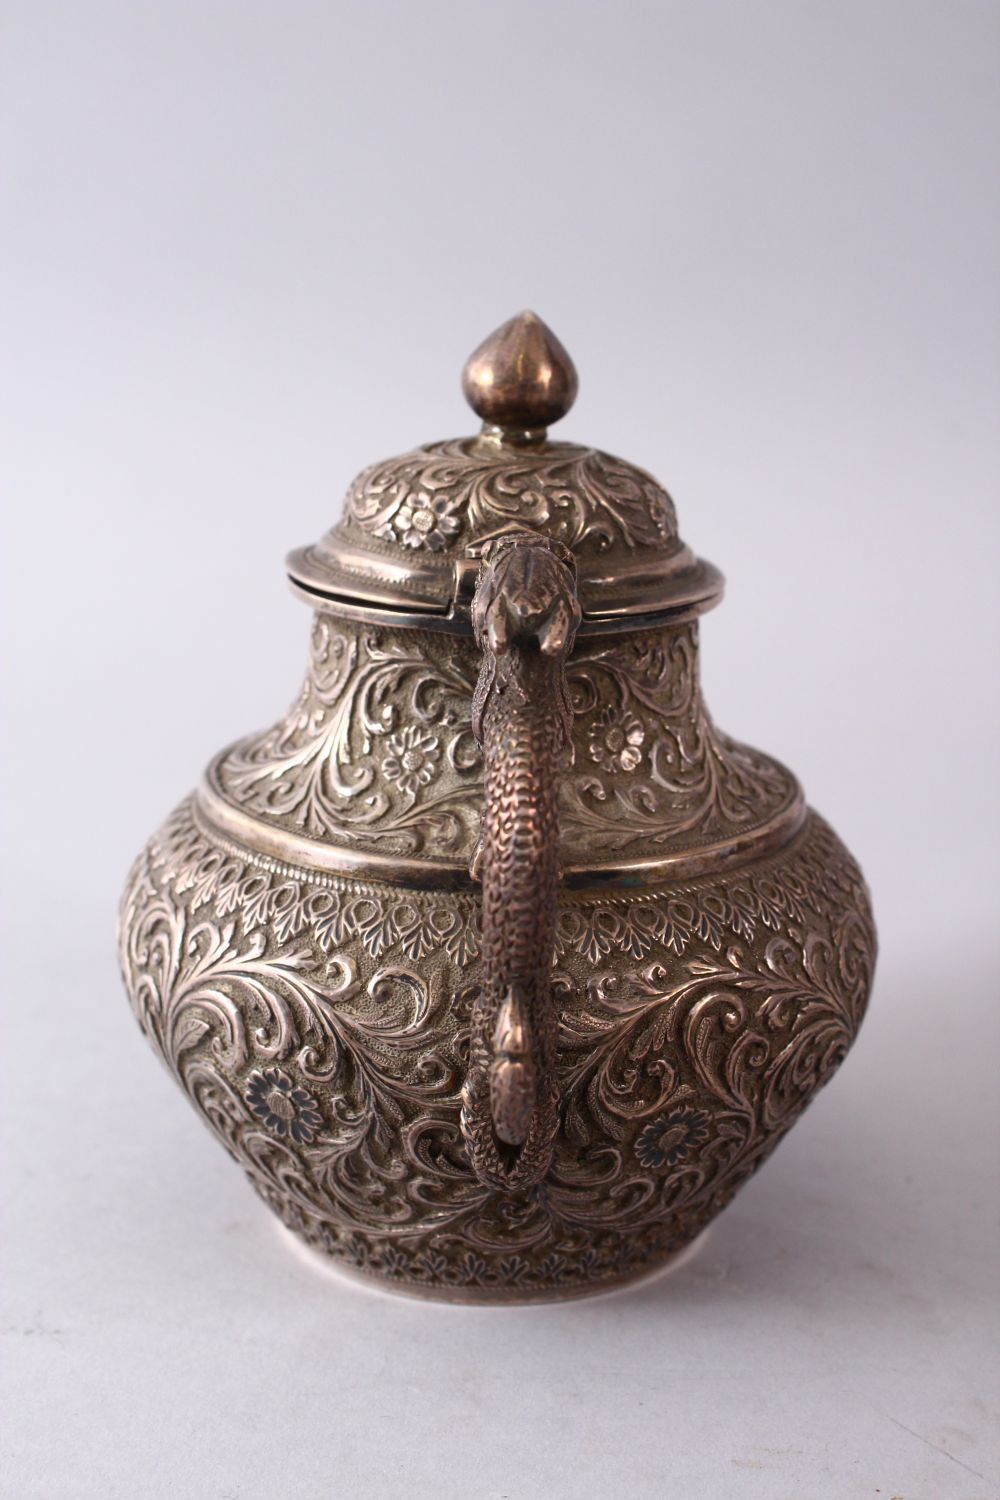 A GOOD 19TH CENTURY TURKISH SOLID SILVER TEAPOT carved with formal foliage and a dog style handle, - Image 4 of 10